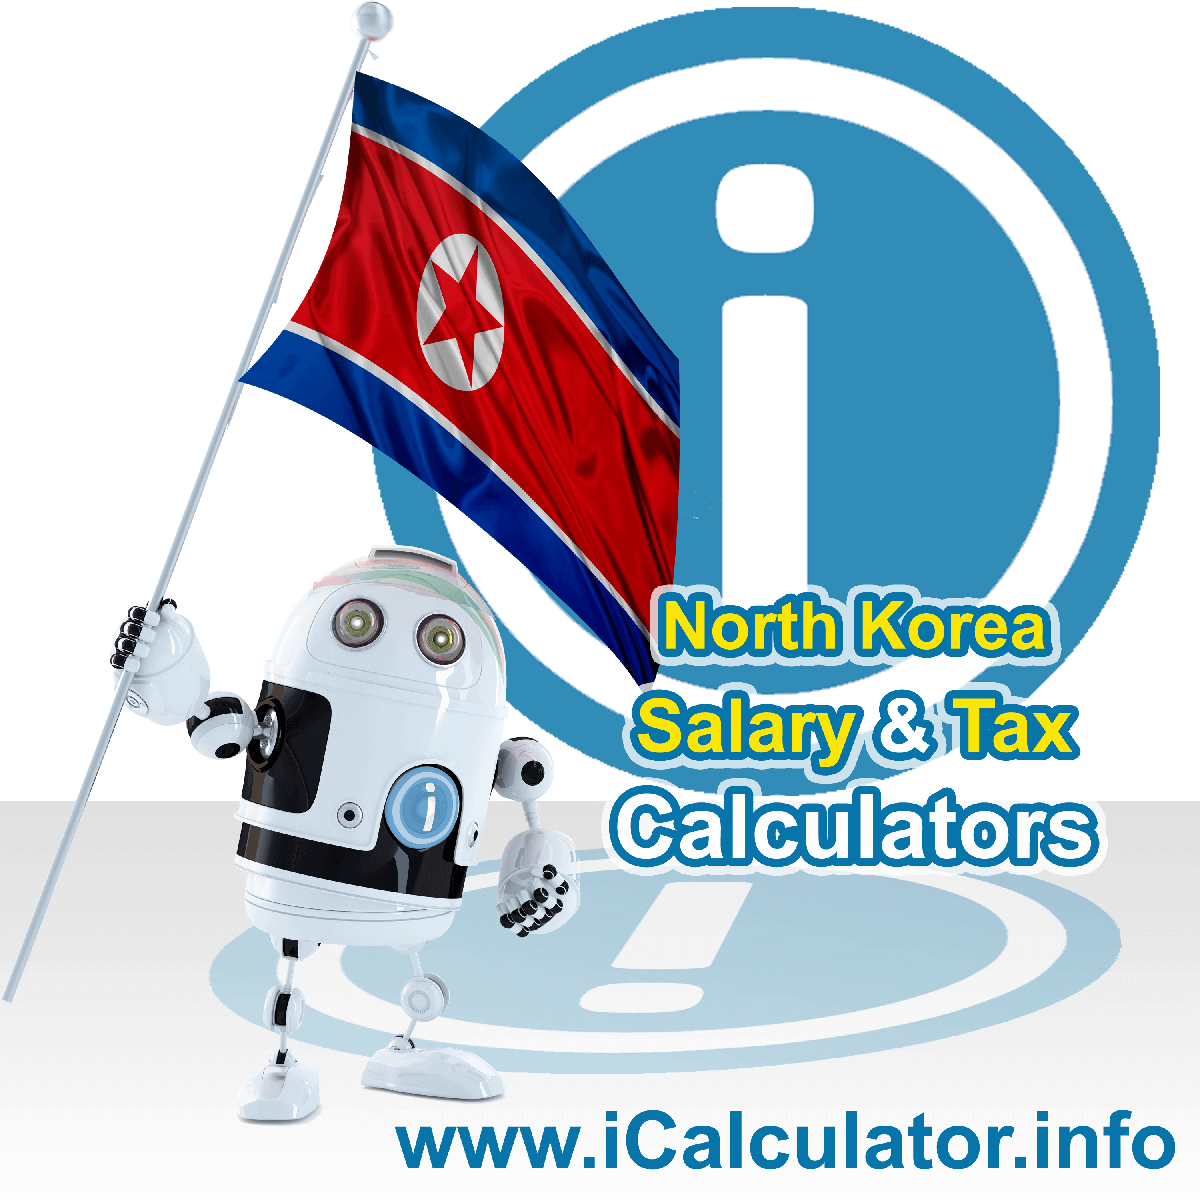 North Korea Wage Calculator. This image shows the North Korea flag and information relating to the tax formula for the North Korea Tax Calculator